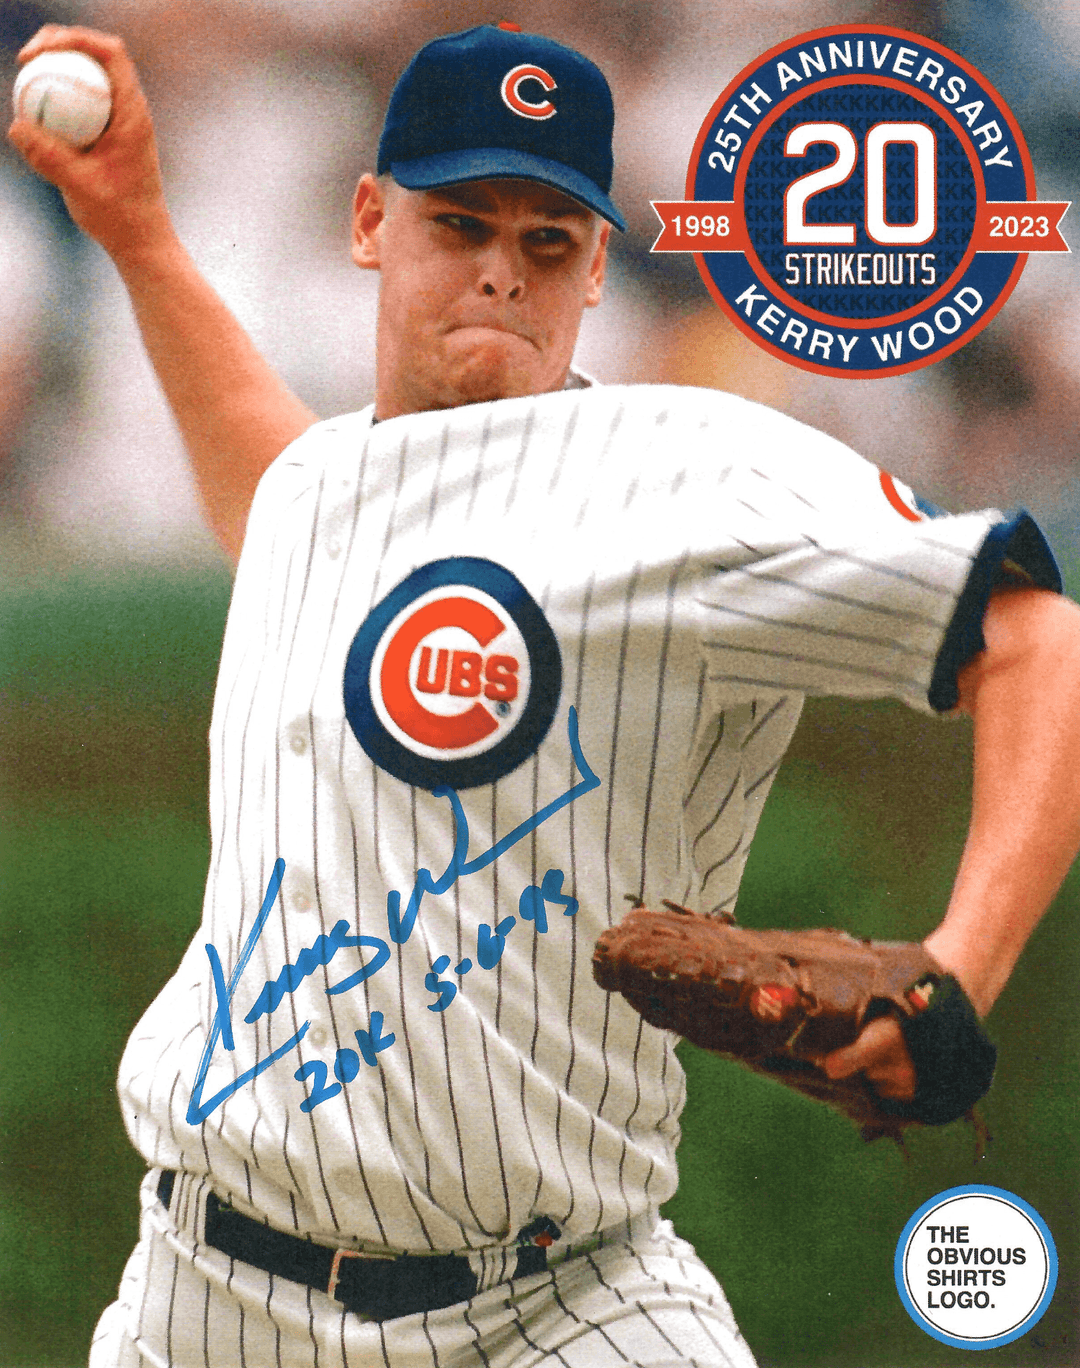 KERRY WOOD 25TH ANNIVERSARY SIGNED 20 STRIKEOUT 8x10 PHOTO - OBVIOUS SHIRTS